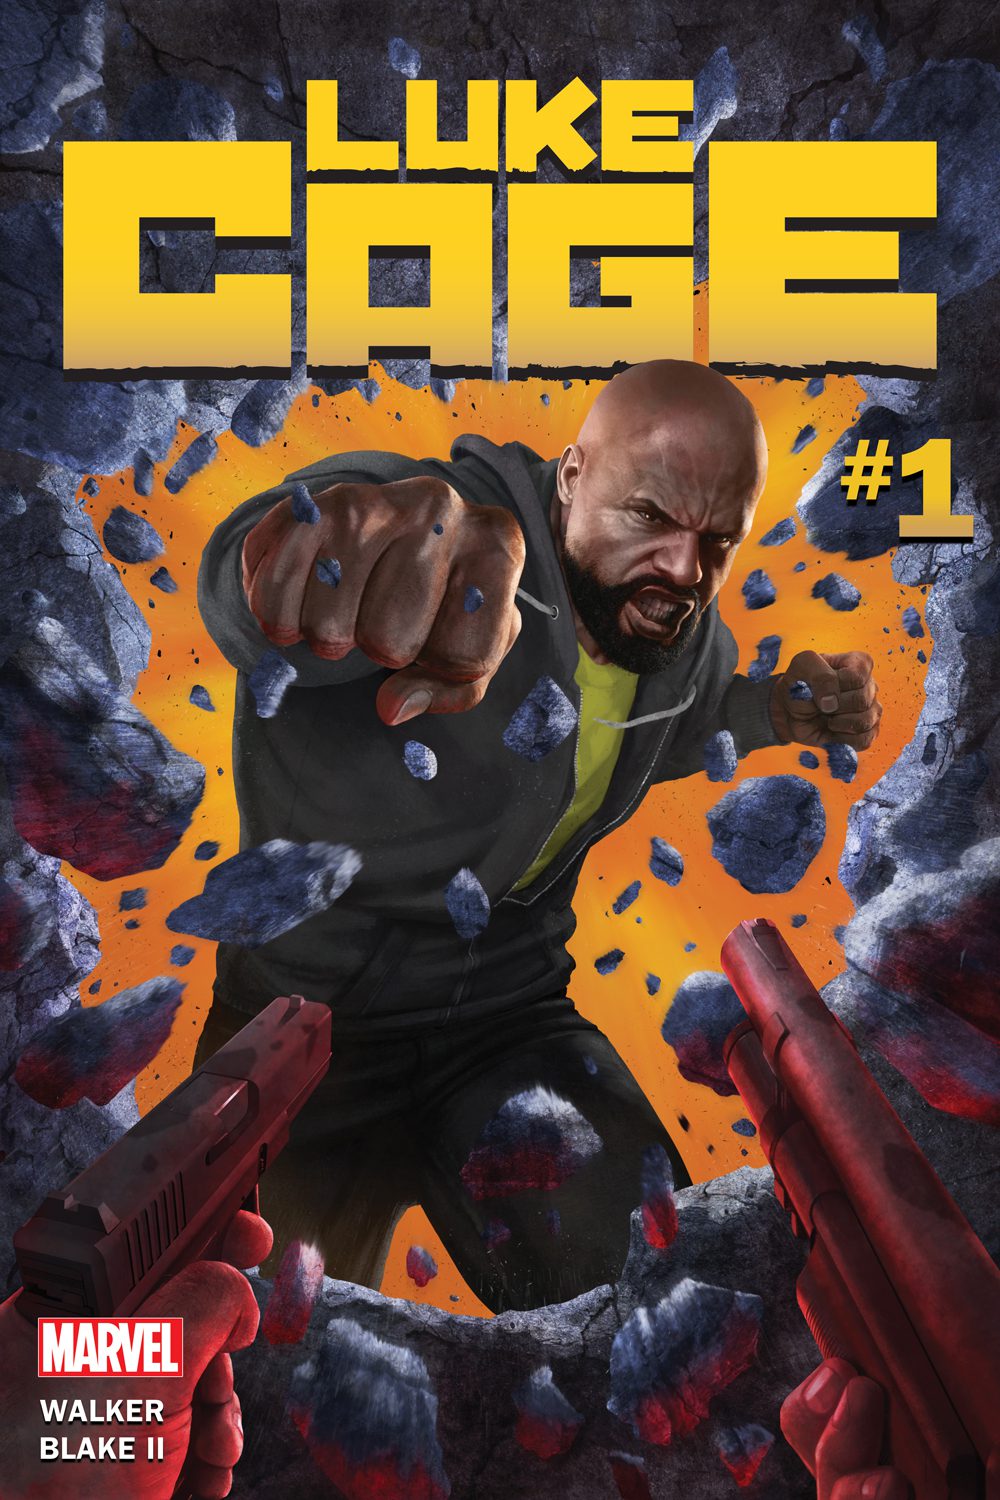 Luke Cage is gettiing his own solo comic series starting this May